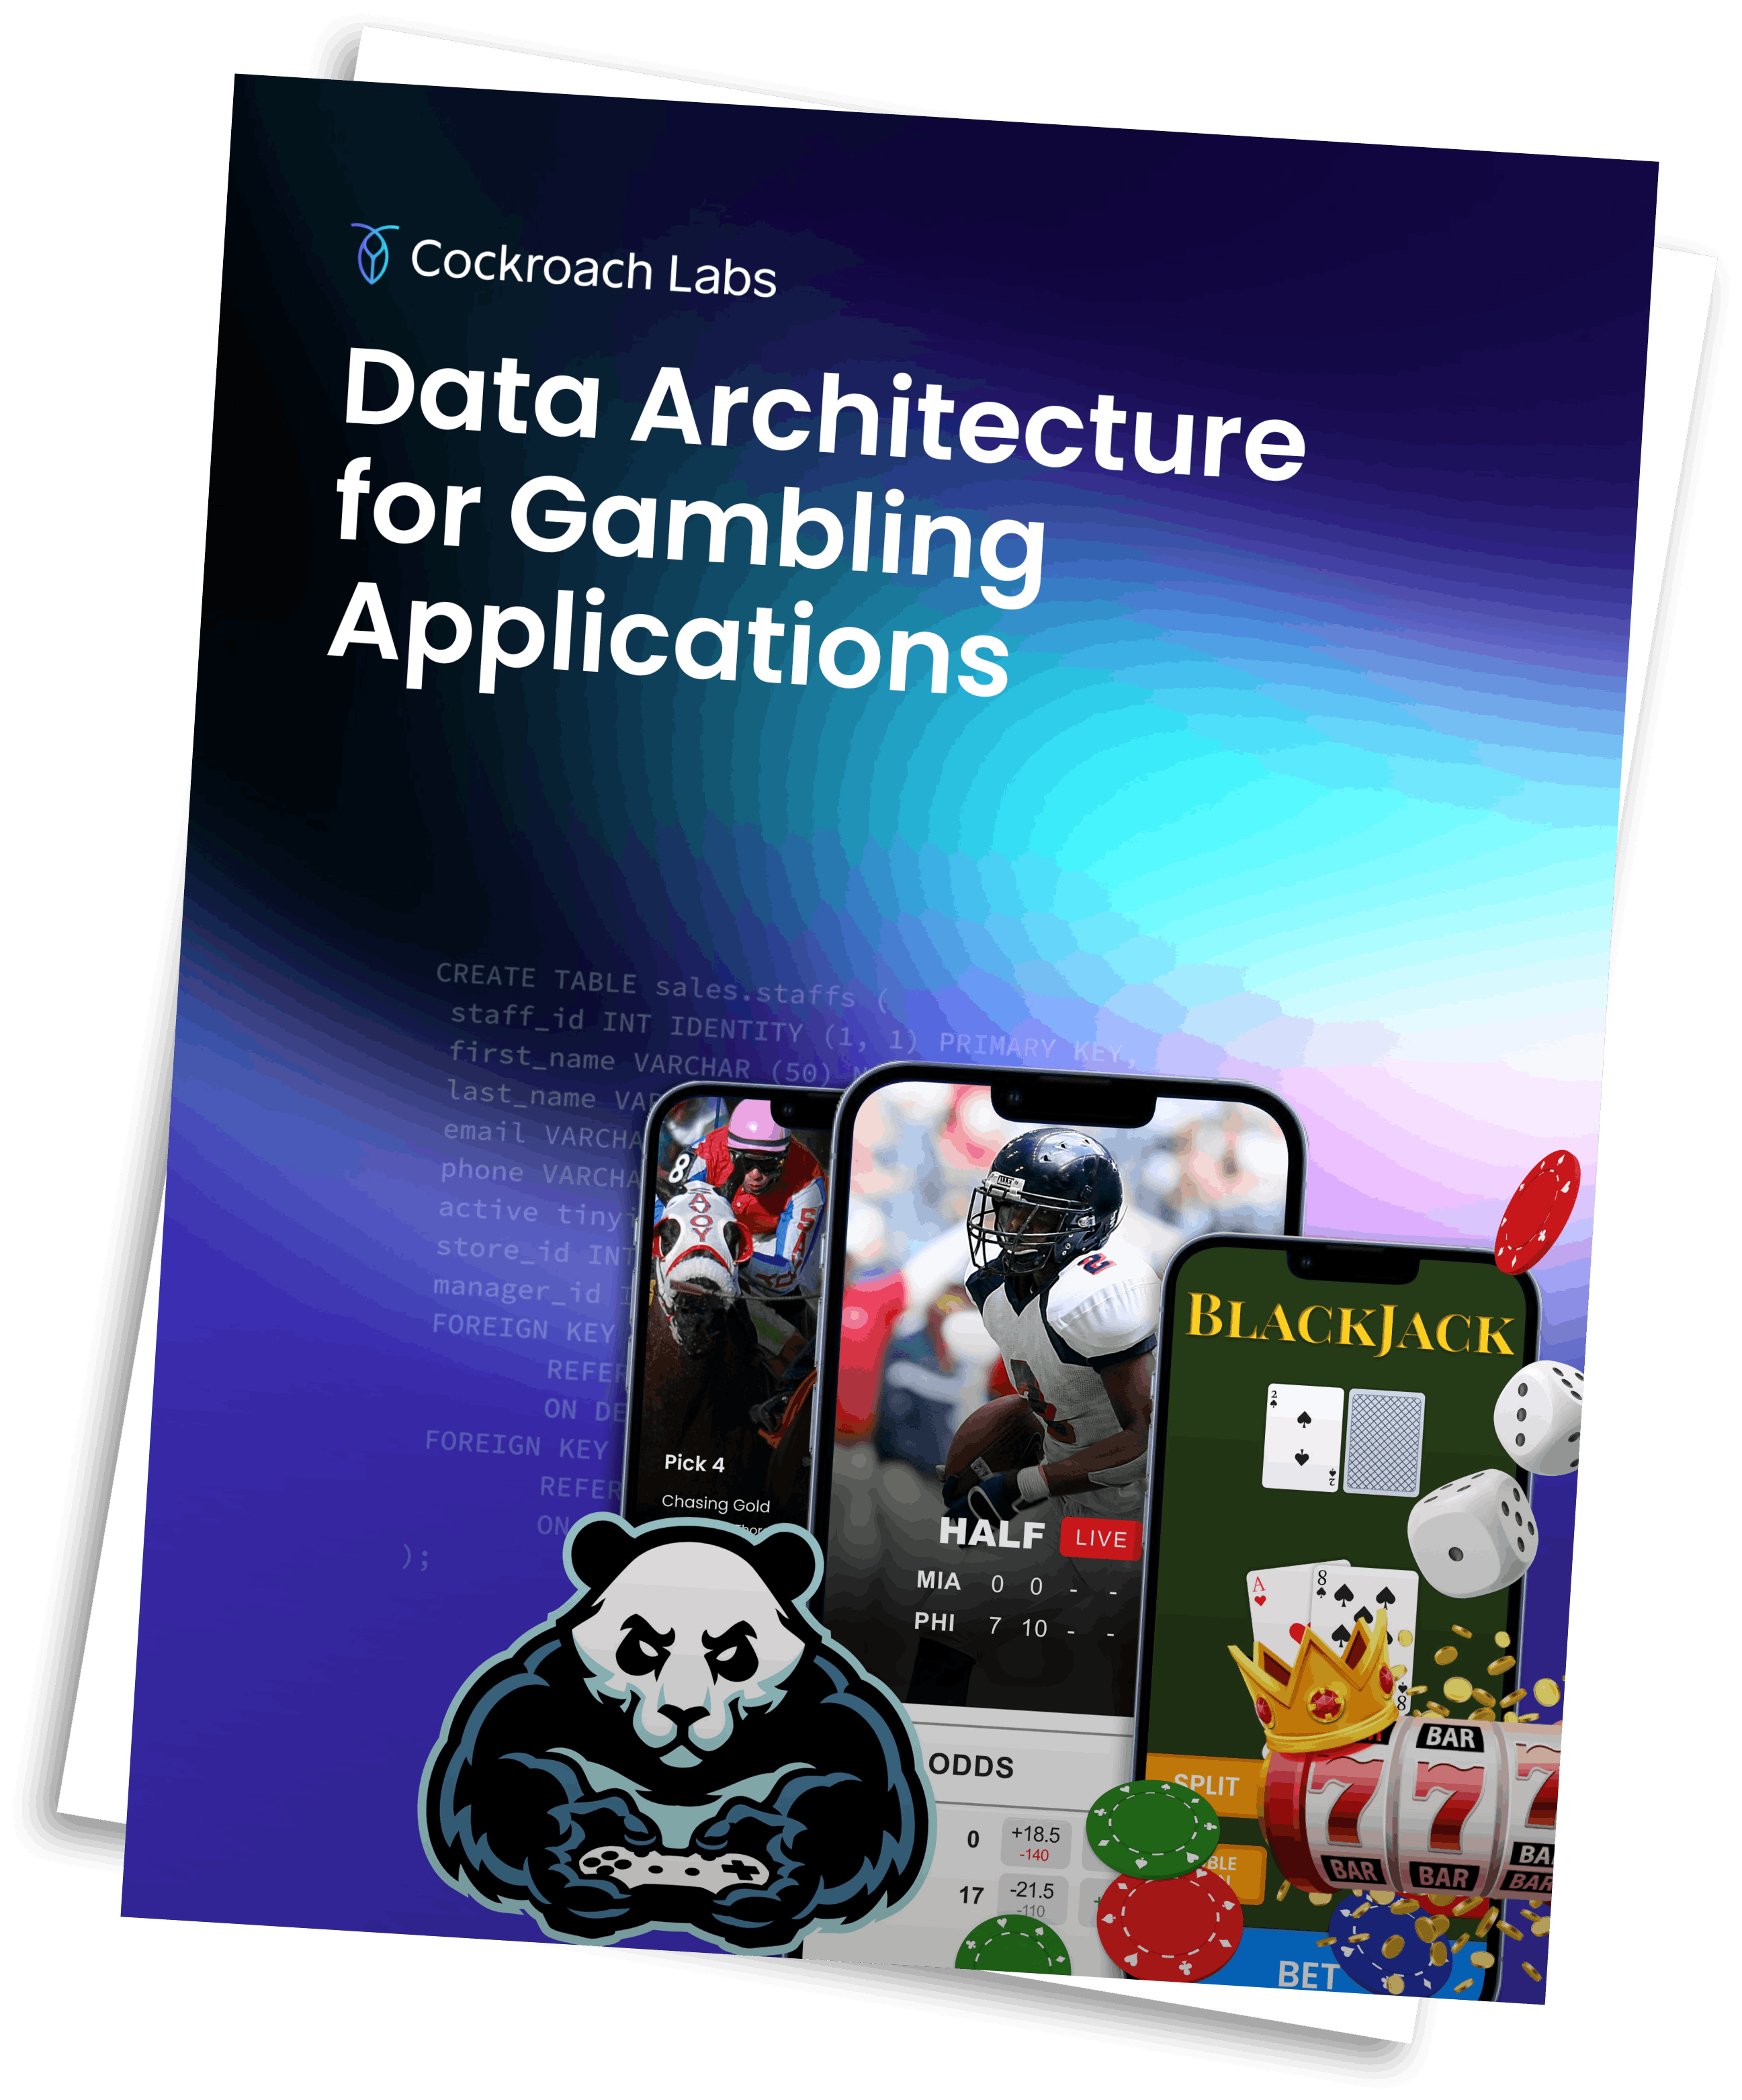 Data architecture for gambling applications | Cockroach Labs